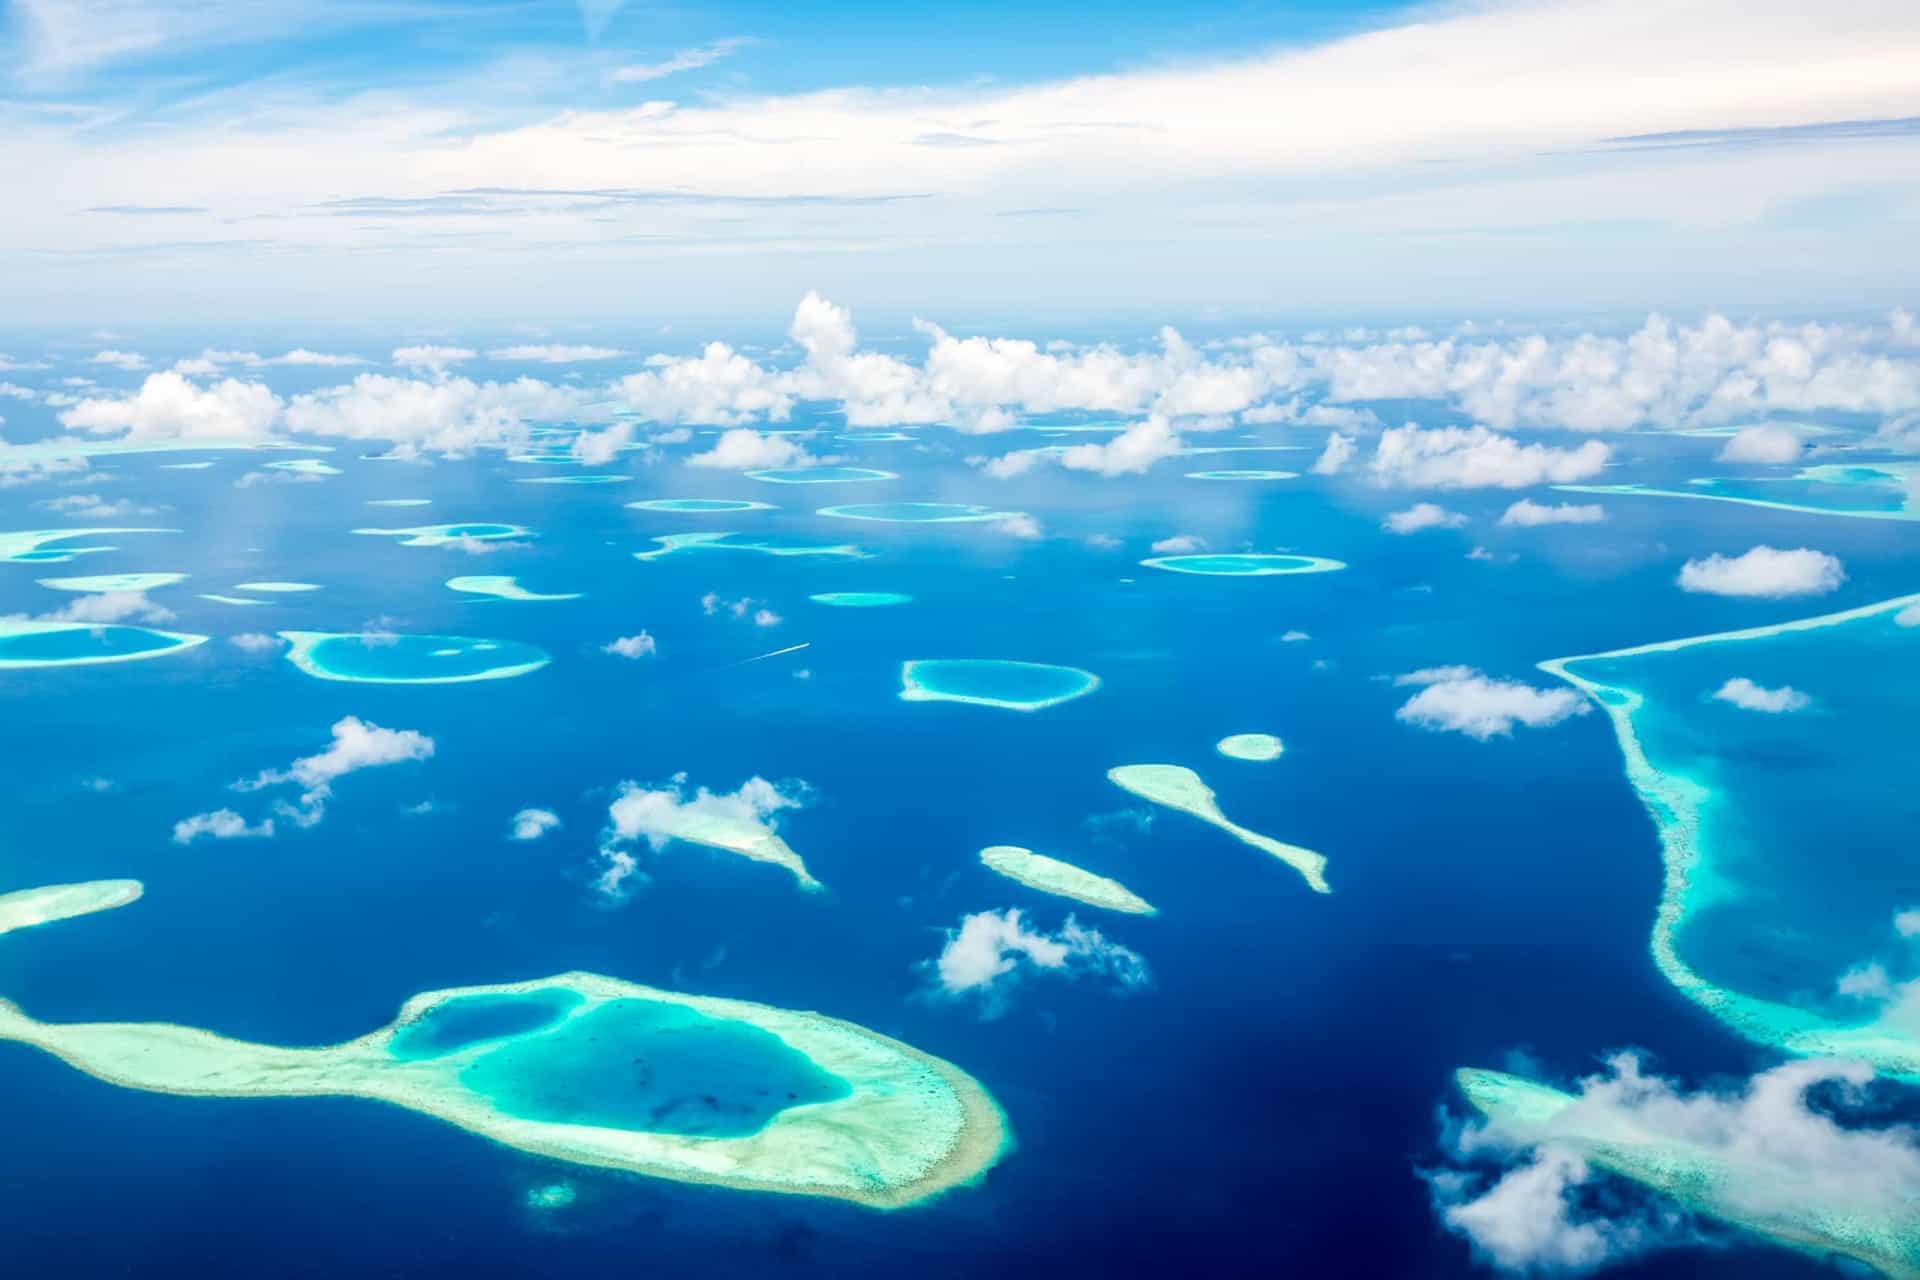 <p>There are few places as beautiful as the Maldives. This small archipelagic state found in South Asia teems with exotic sea life, white sandy beaches, and fun activities.</p><p>The exclusive destination is the capital of luxury resorts. It provides guests with some of the best food, spa treatments, and rooms that money can buy. And then, of course, there are the natural wonders of the Maldives. From baby sea turtles to dinners on the beach, a trip to the Maldives will ensure relaxation, luxury, and incredible natural sights.</p><p>If you want to visit true paradise on Earth, take a look through this gallery. Click on!</p>